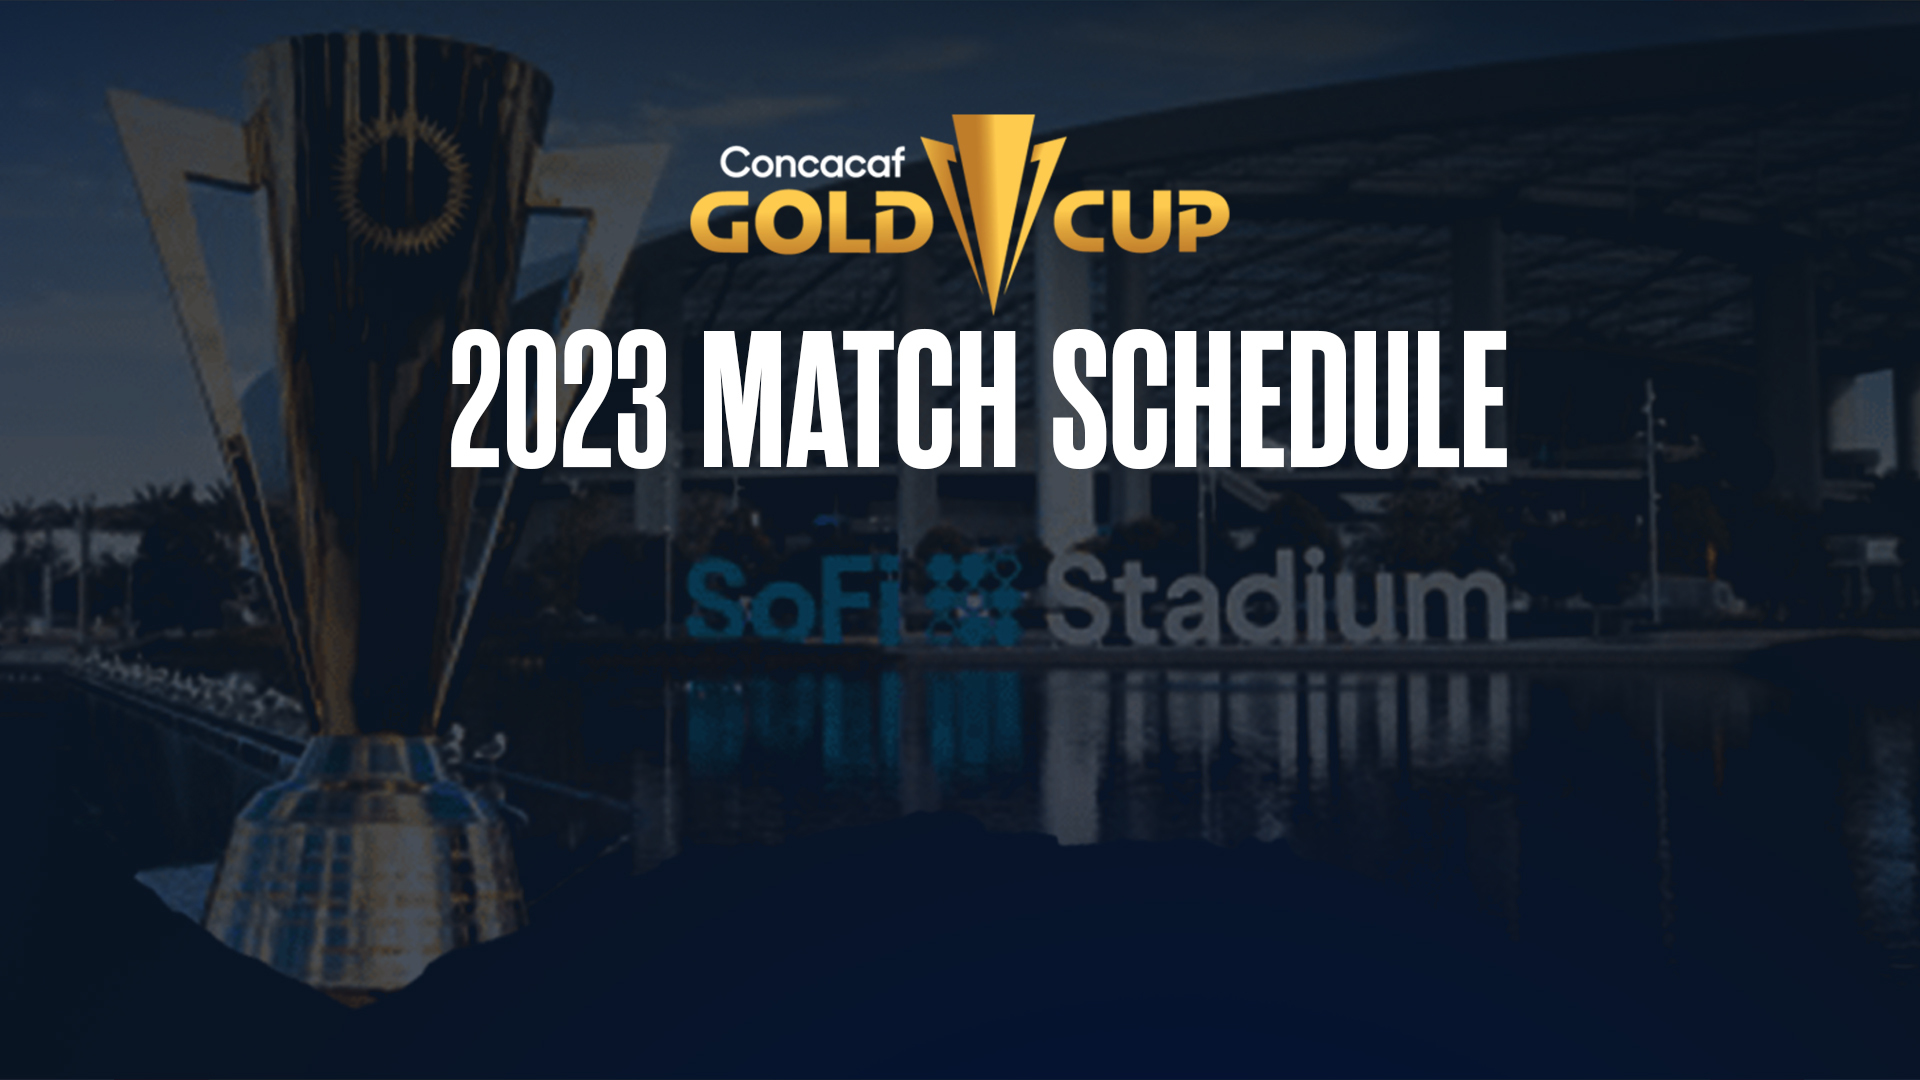 The best group stage matchups in Leagues Cup 2023